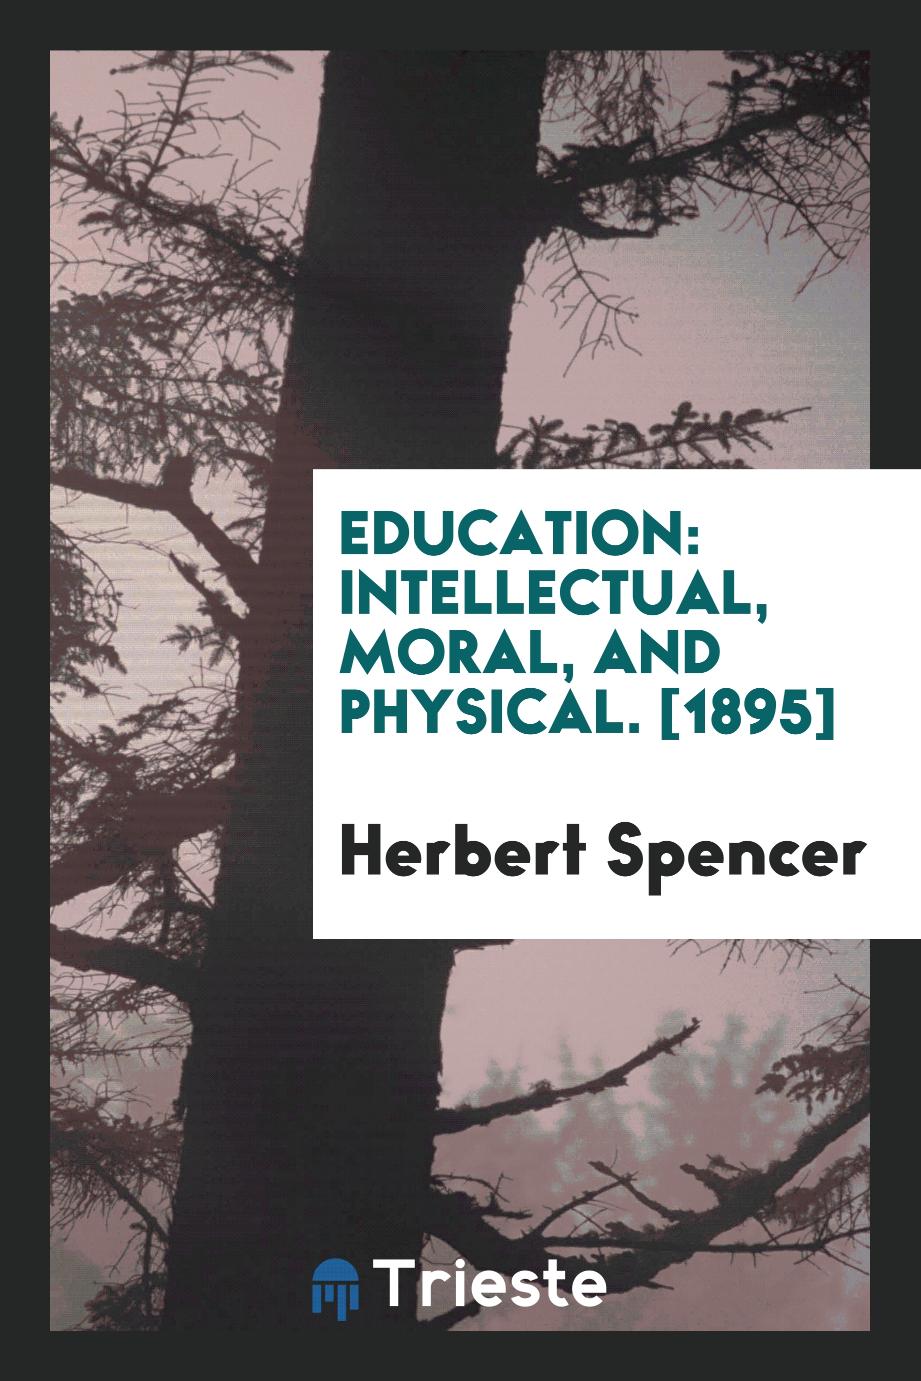 Herbert Spencer - Education: Intellectual, Moral, and Physical. [1895]